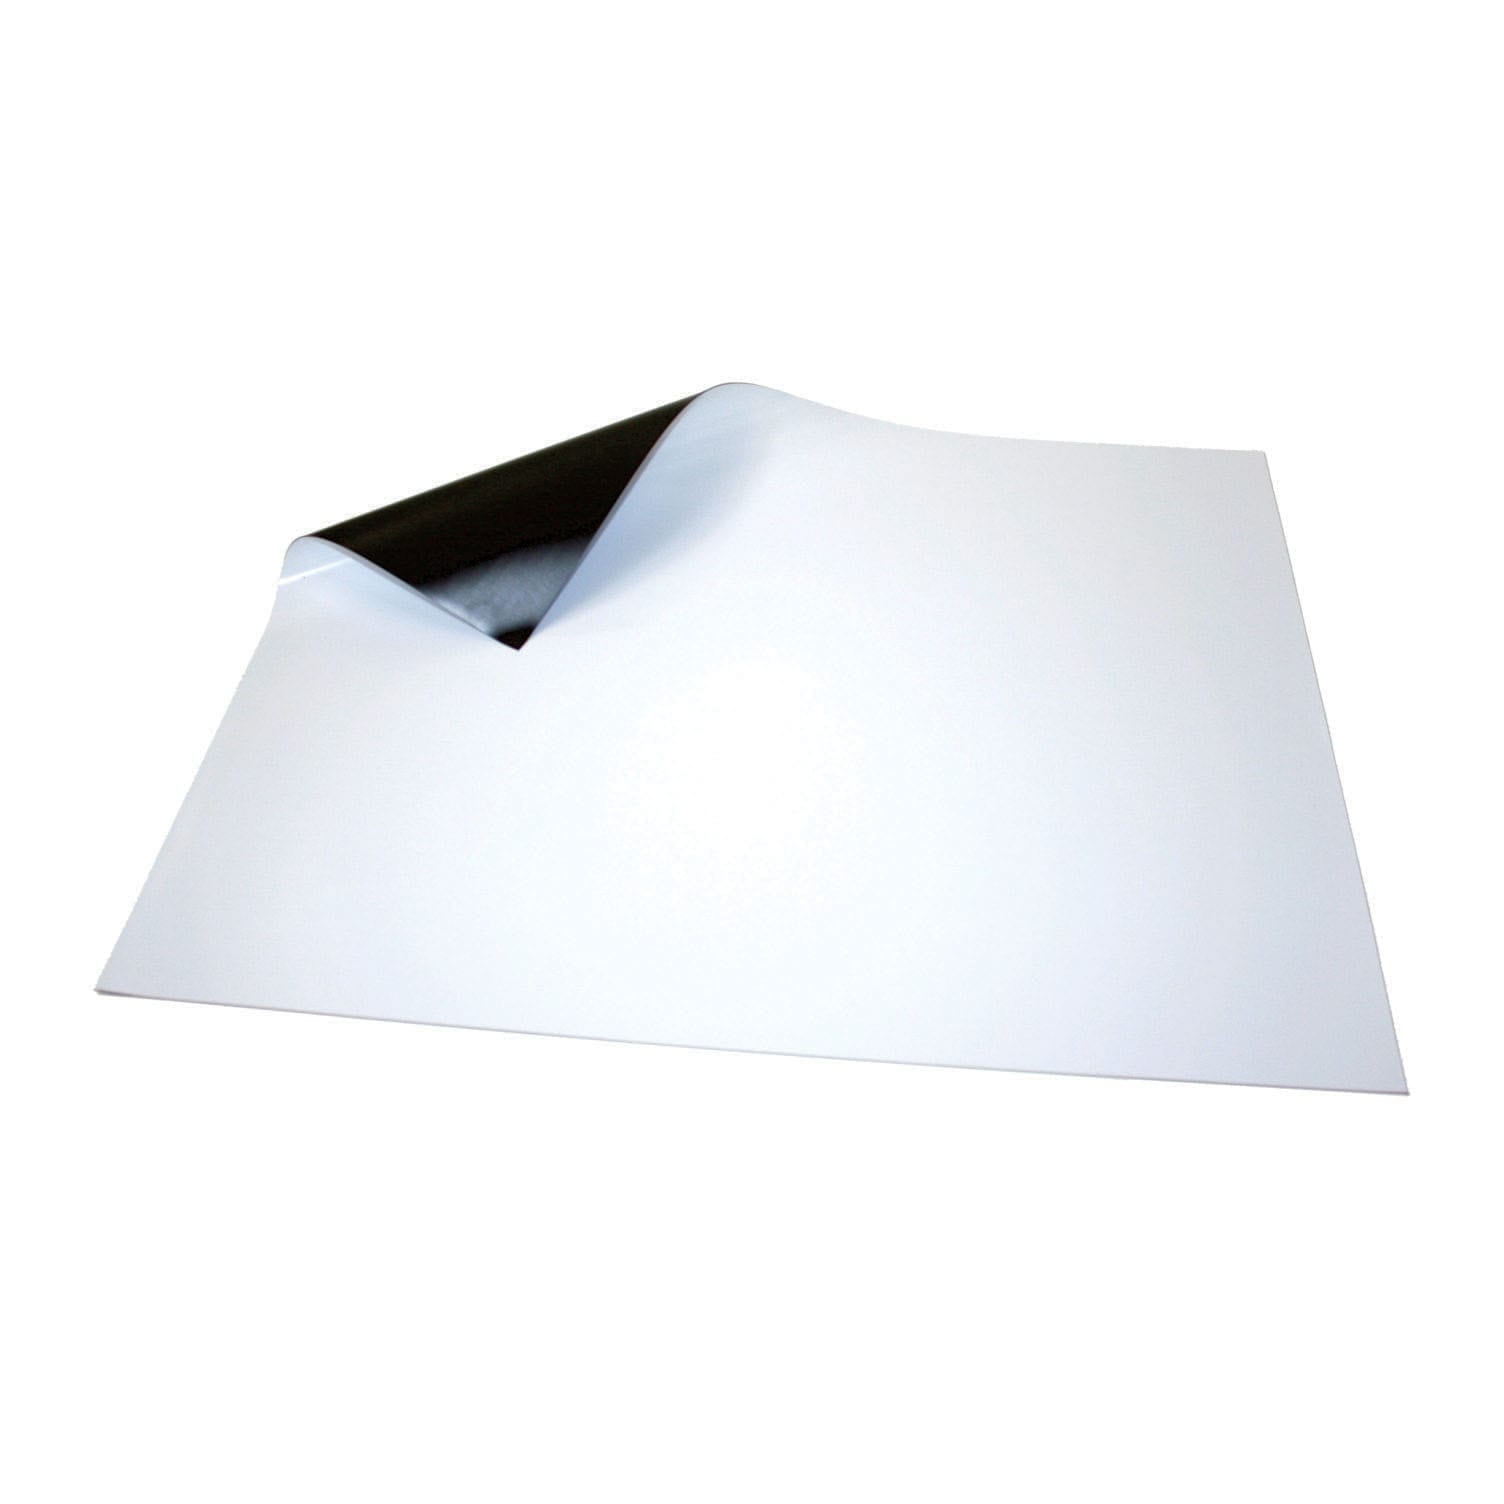 620mm x 500mm White Magnetic Sheet | Magnets NZ | Local Supplier